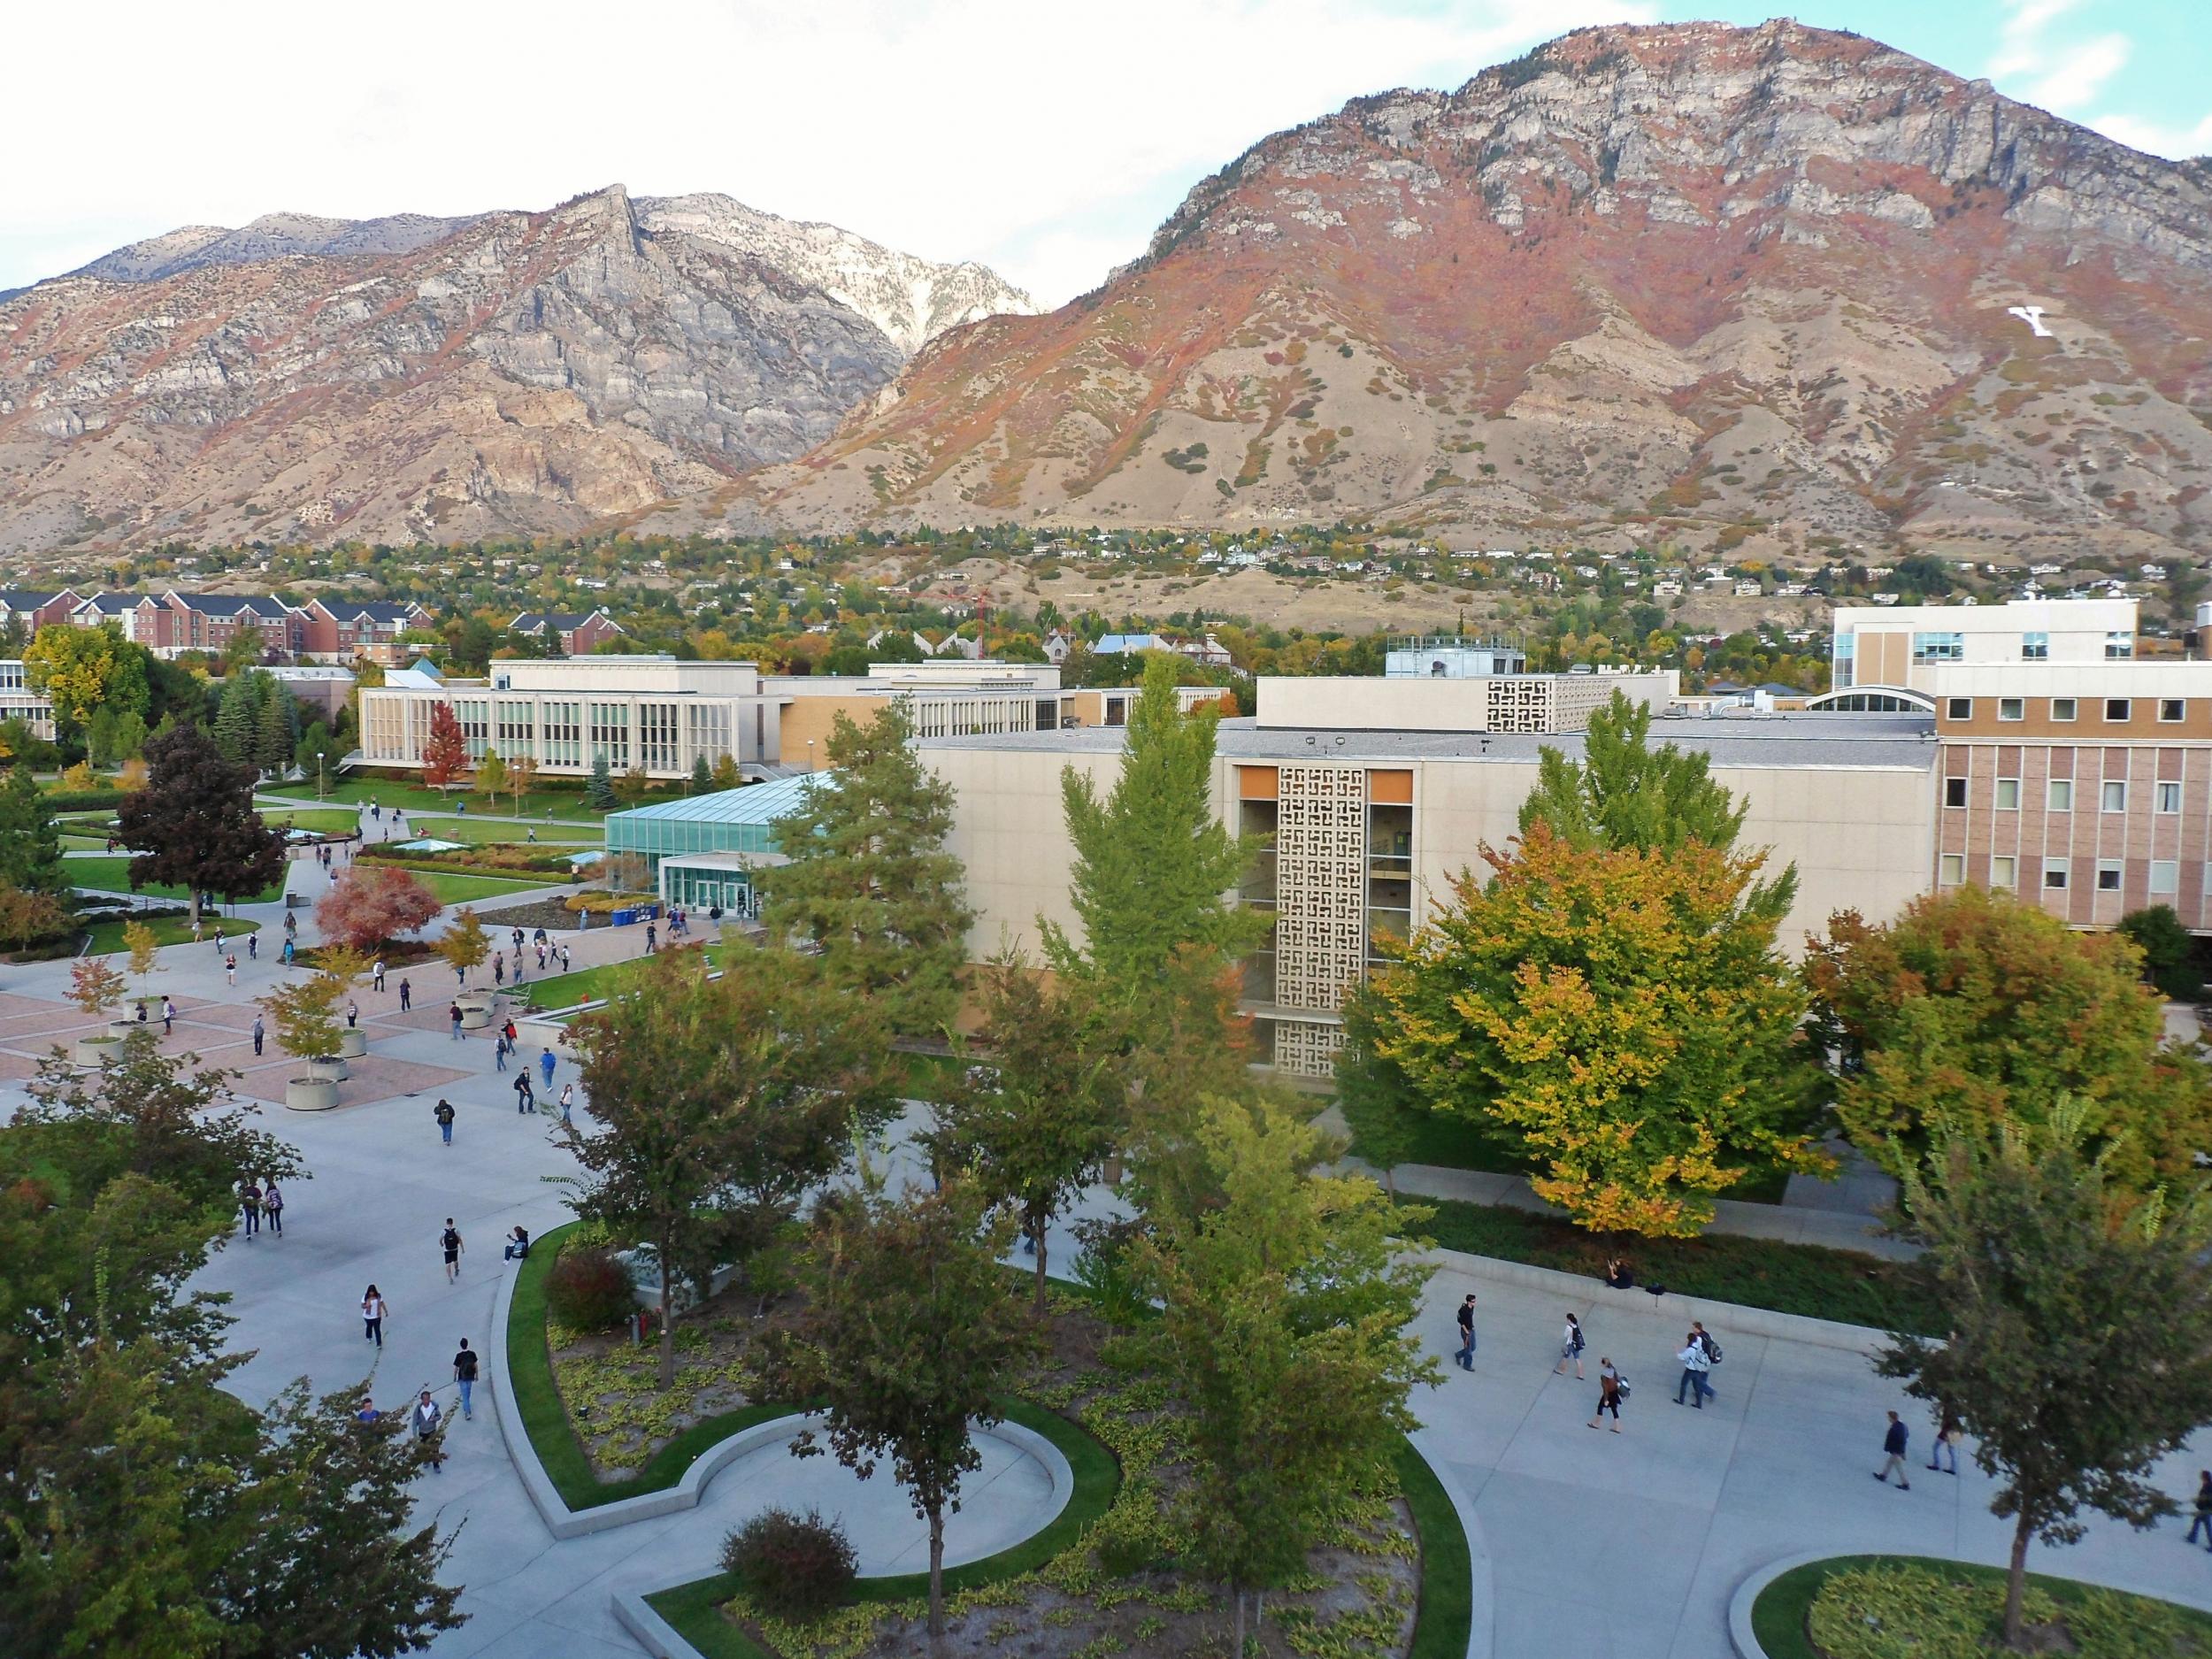 The Brigham Young University is owned by the Church of Jesus Christ of Latter-day Saints